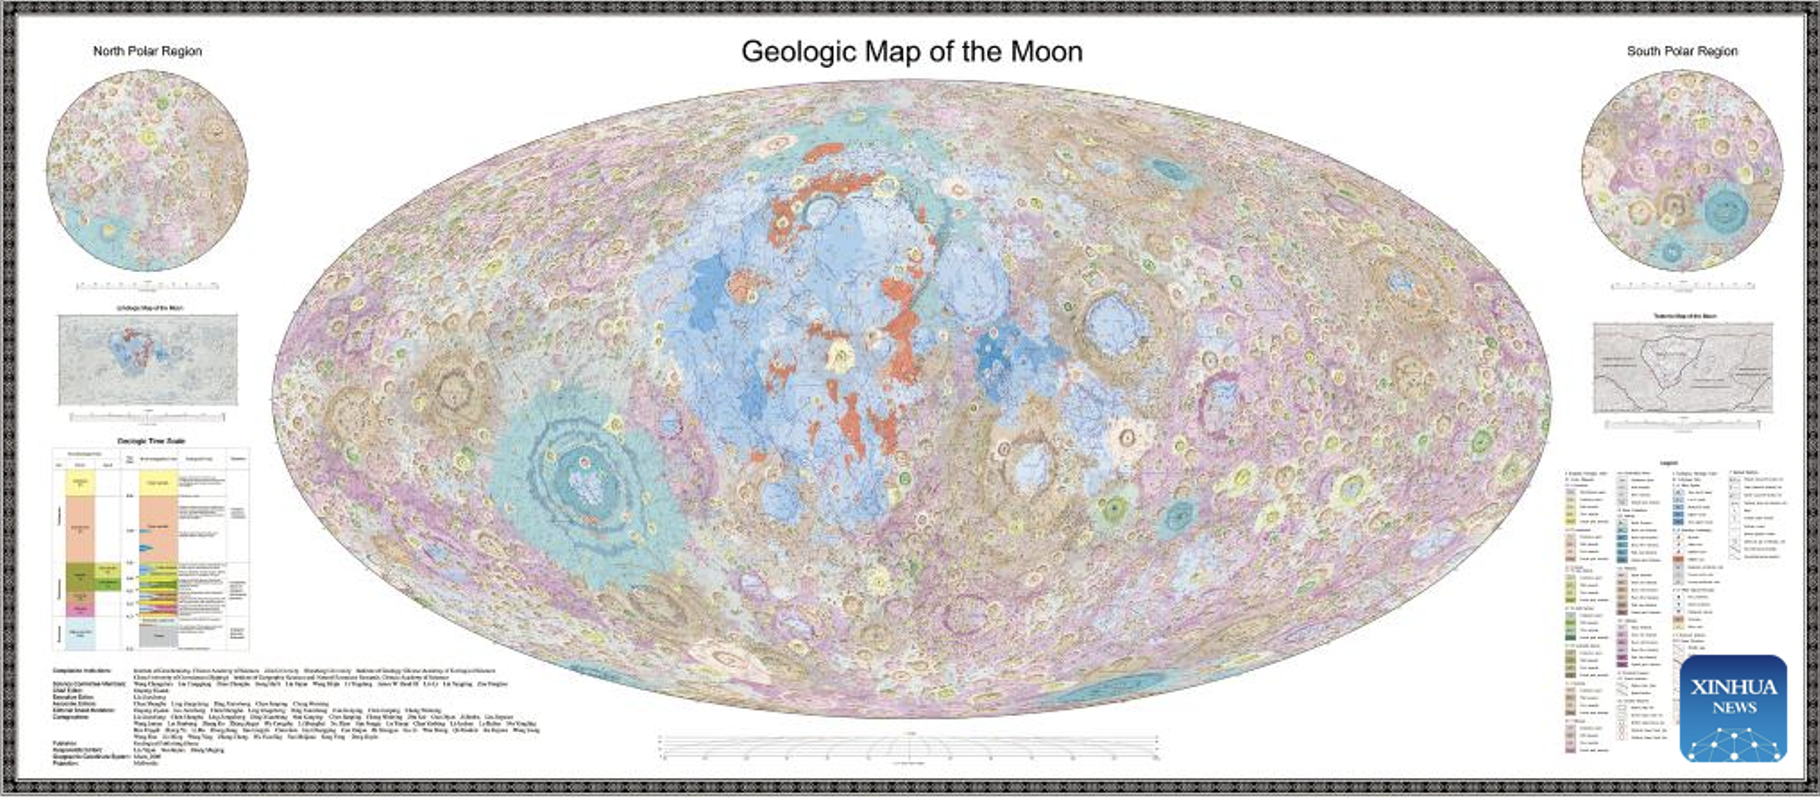 Geologic atlas of the moon at 1:2.5 million published